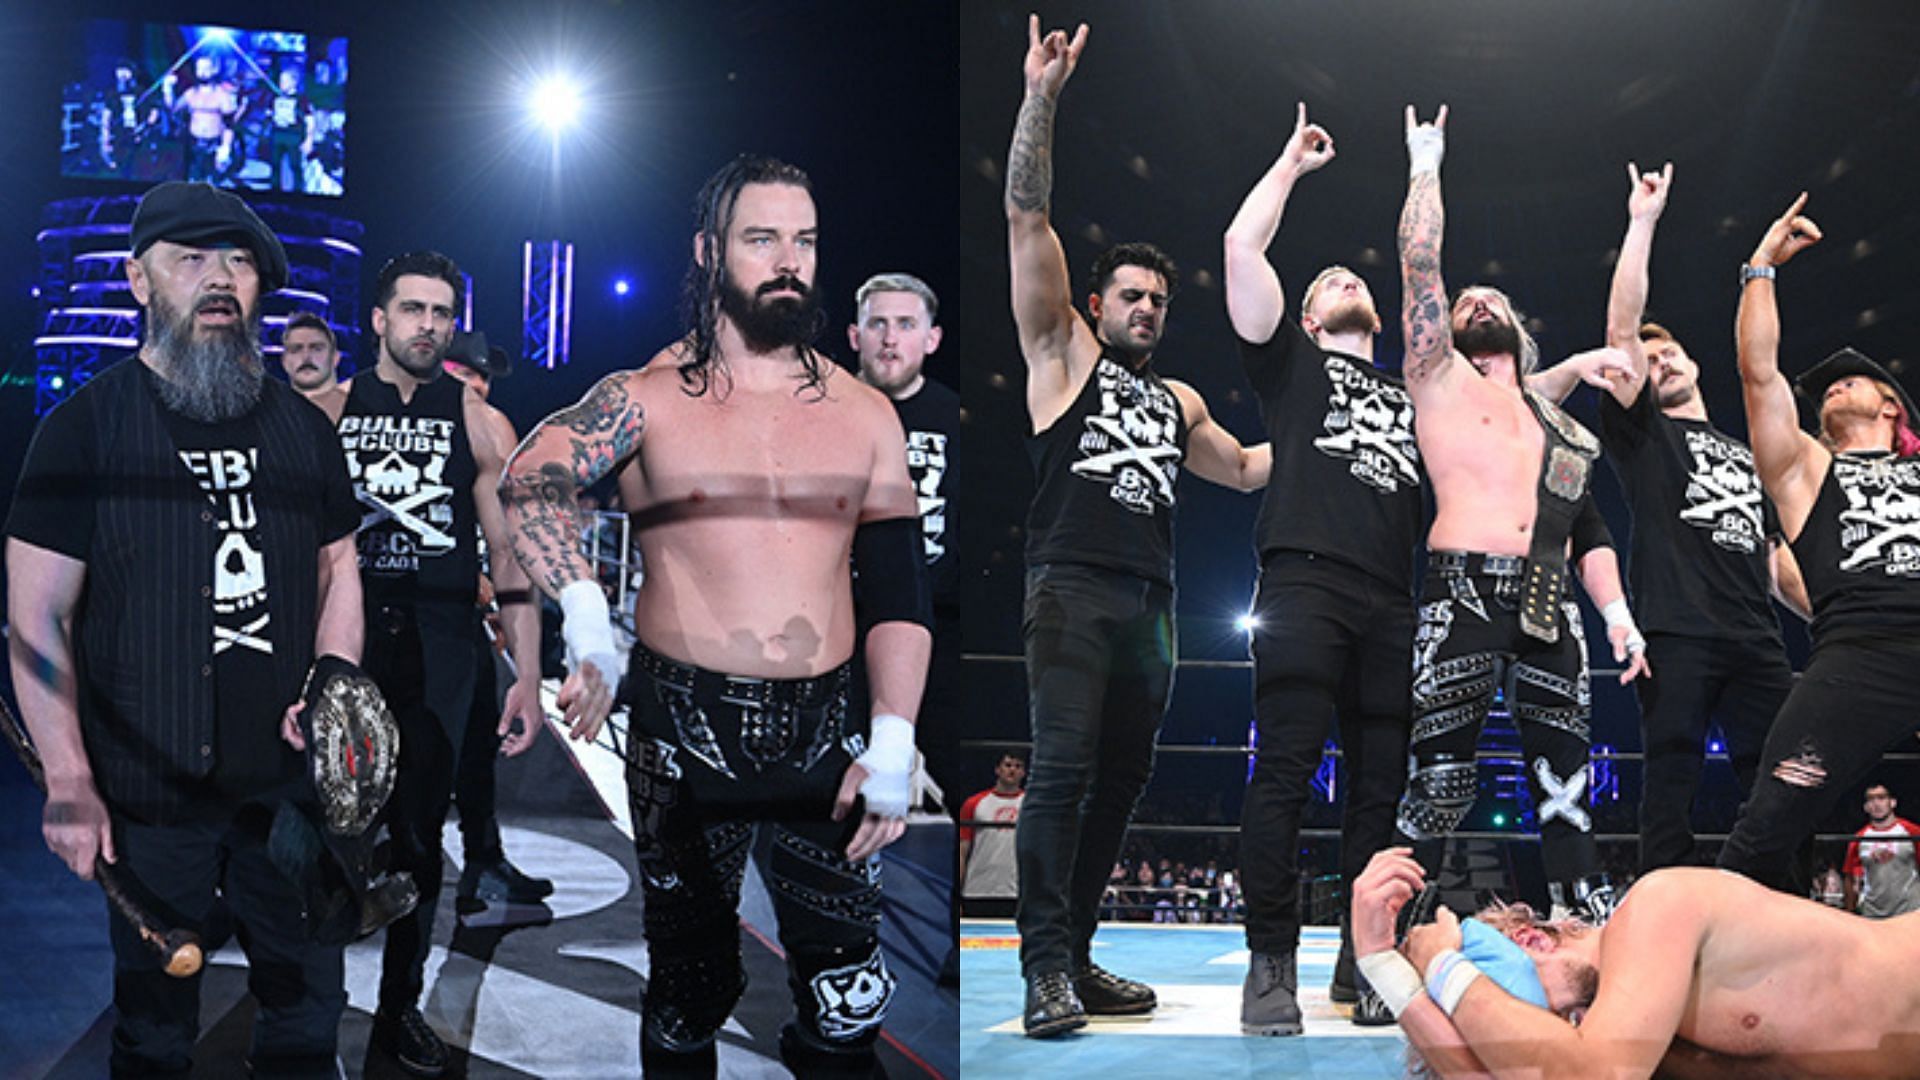 David Finlay is the leader of the new generation of the Bullet Club